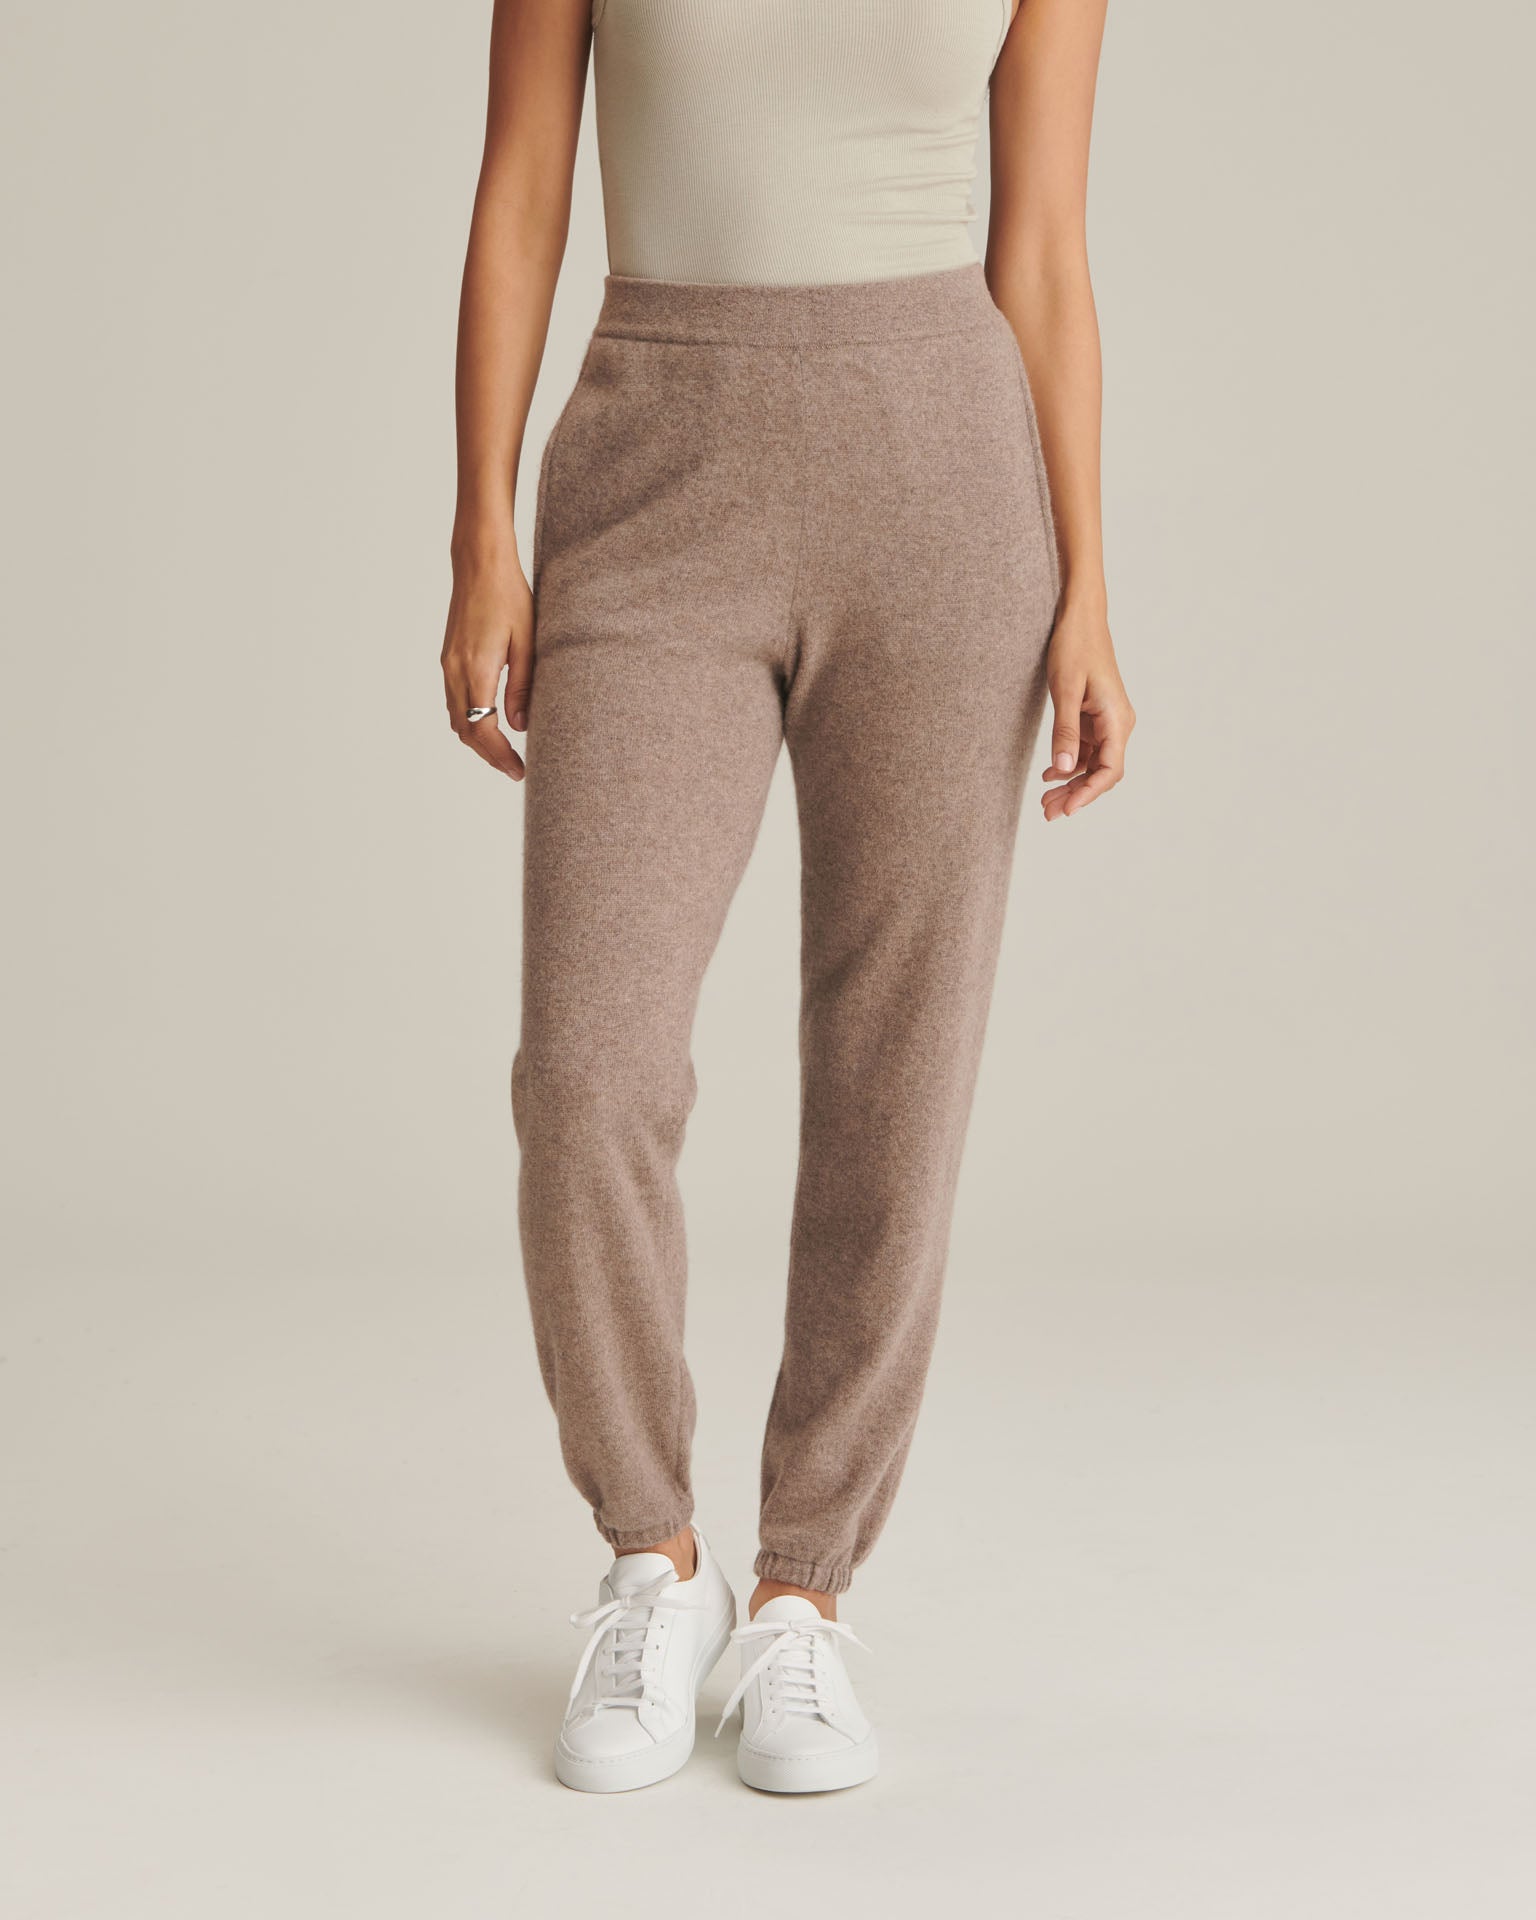 Comfy Joggers for Women - Deep Taupe